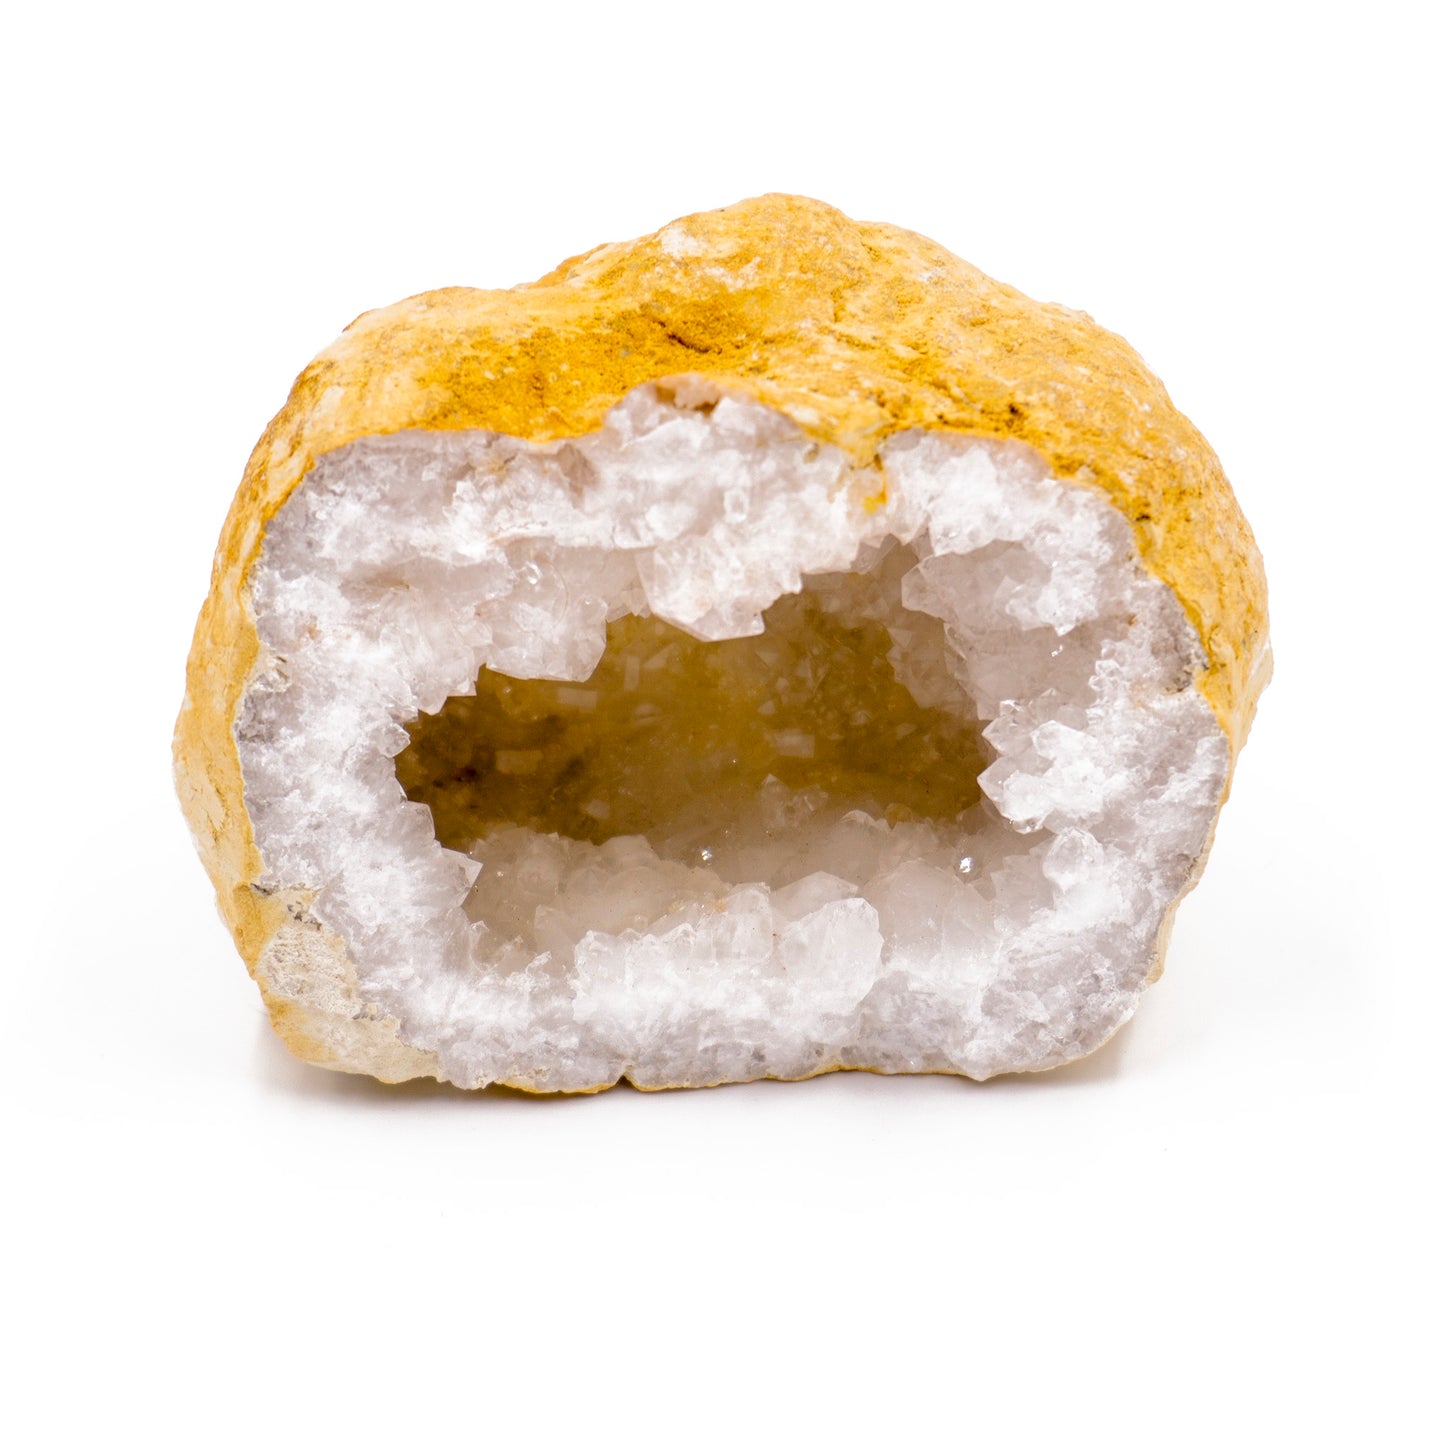 yellow stone cut in half to reveal a white crystal geode